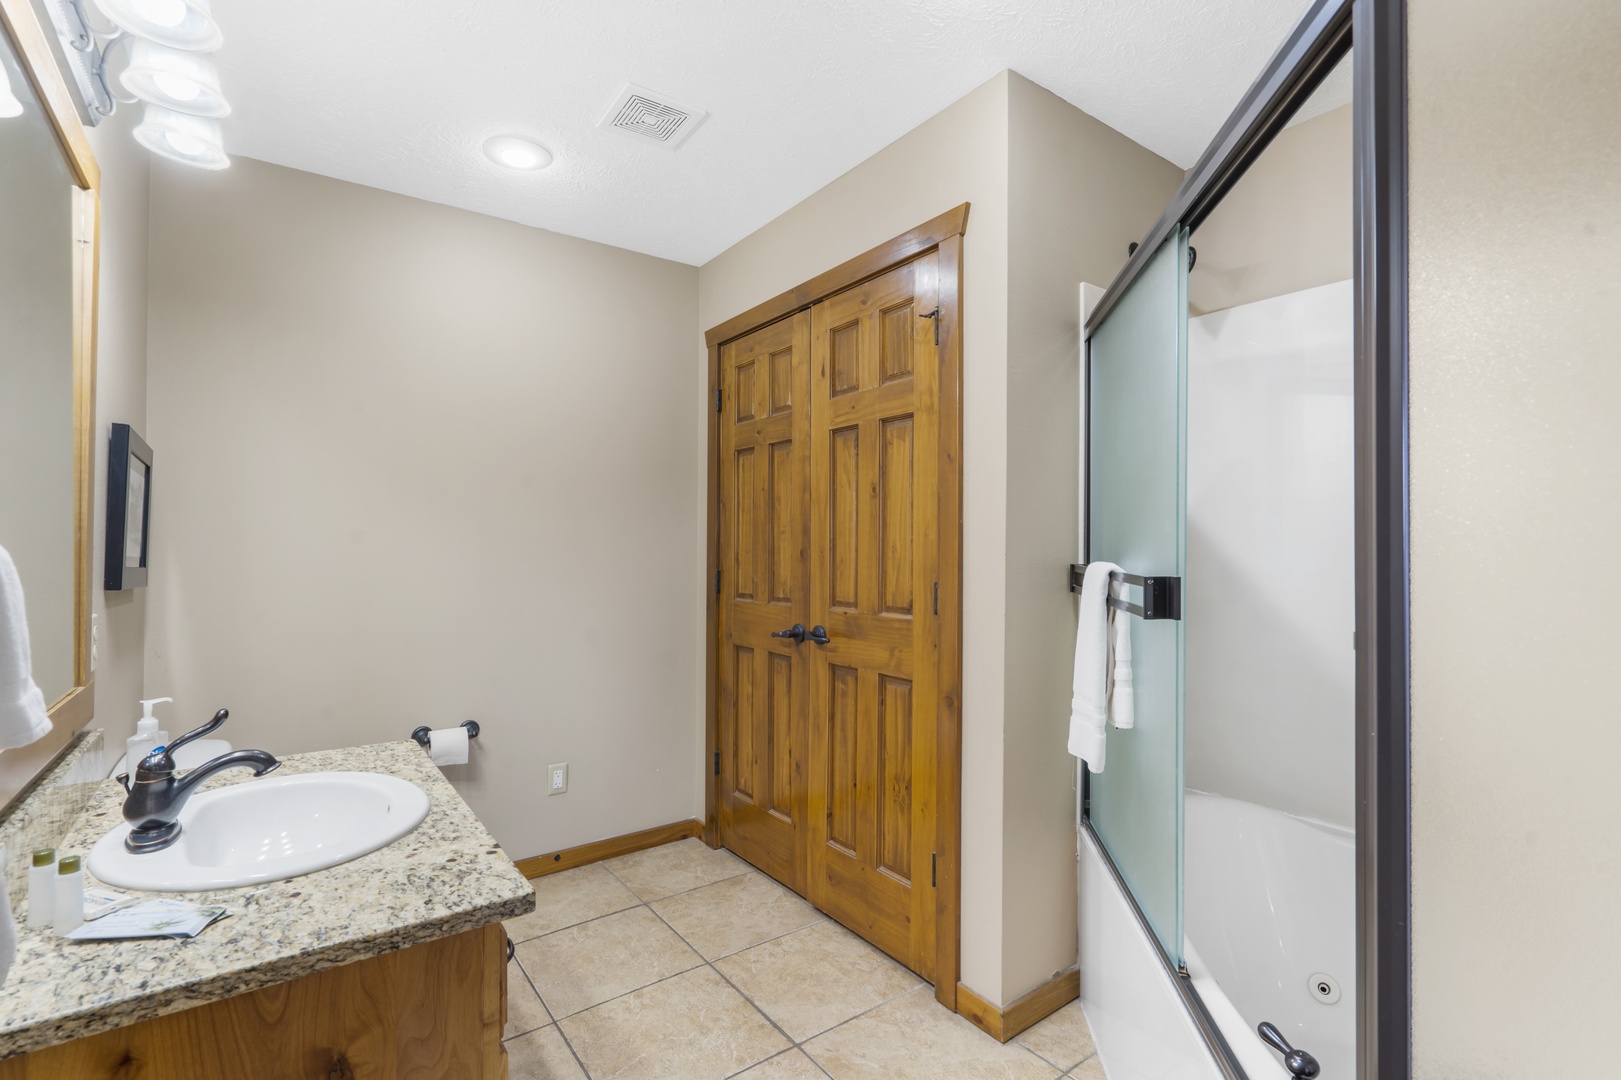 A single vanity & oversized shower/tub combo are available in this ensuite